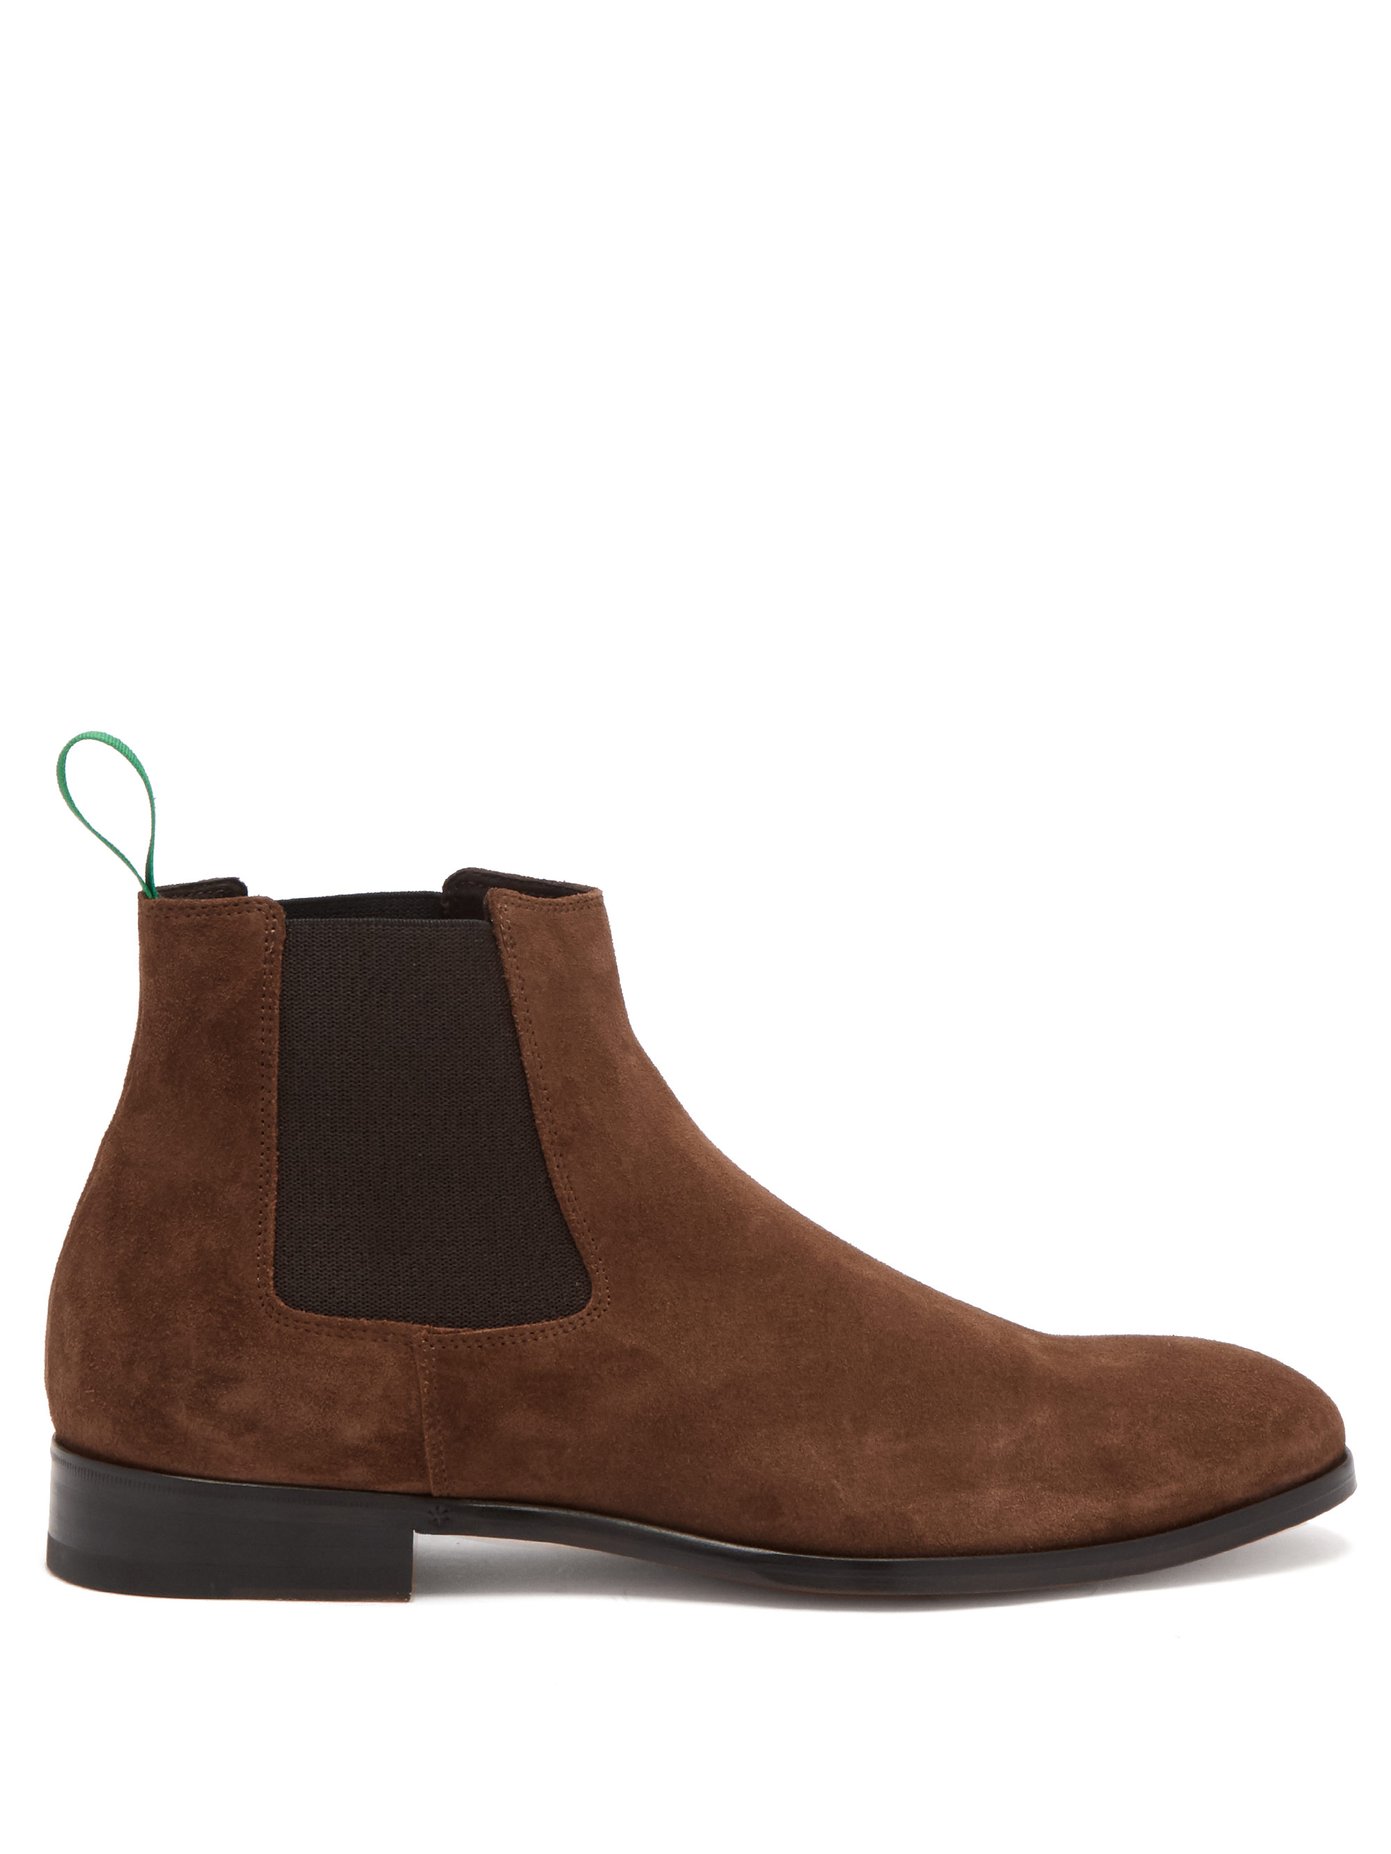 Crown suede Chelsea boots | Paul Smith 